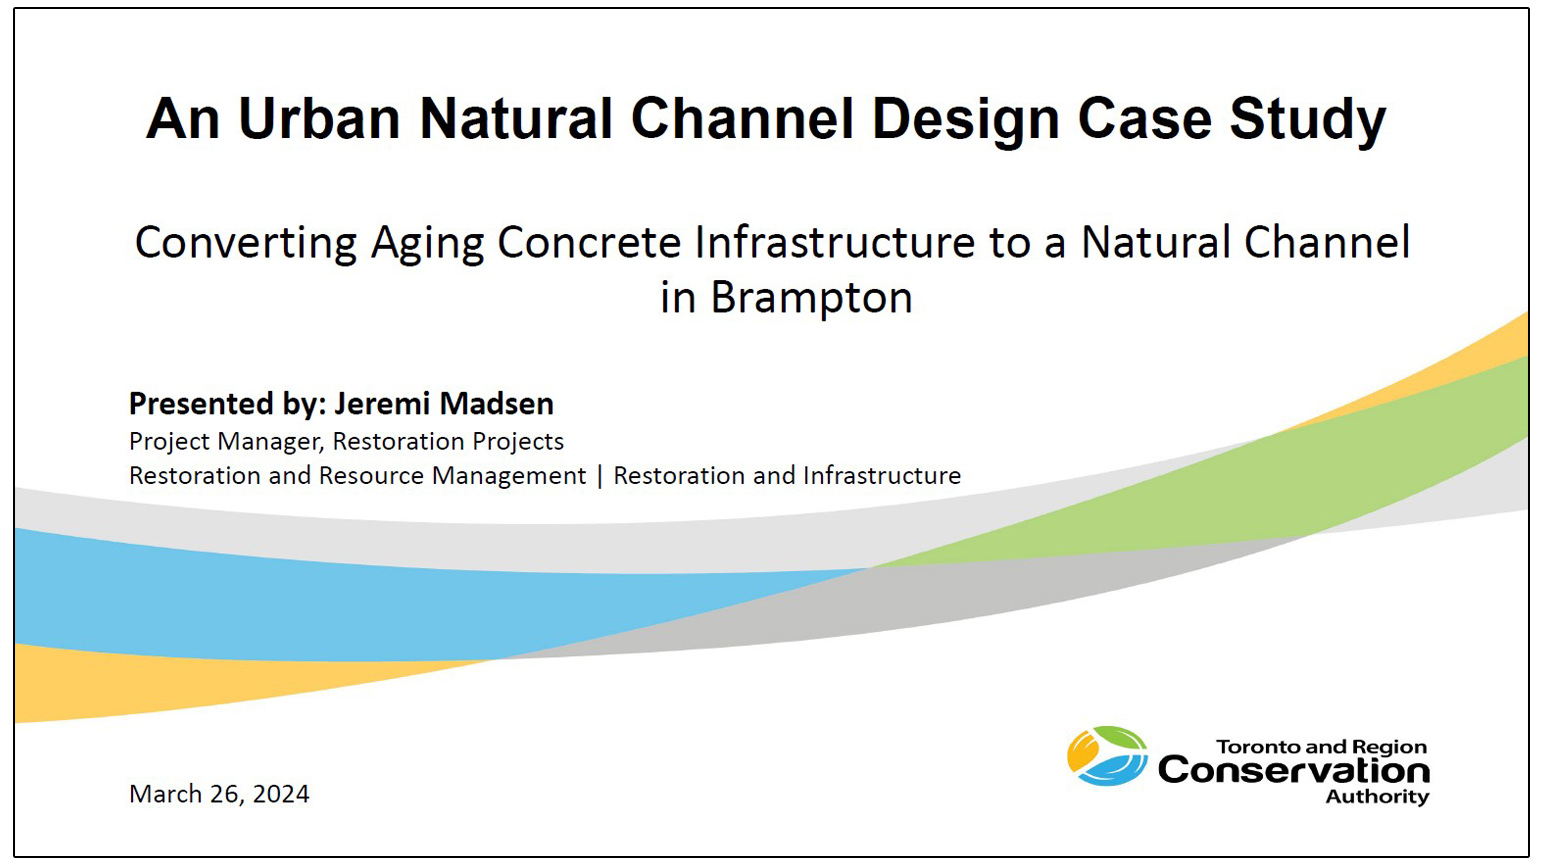 An Urban Natural Channel - Design Case StudyConverting Aging Concrete Infrastructure to a Natural Channel in Brampton - presented by Jeremi Madsen